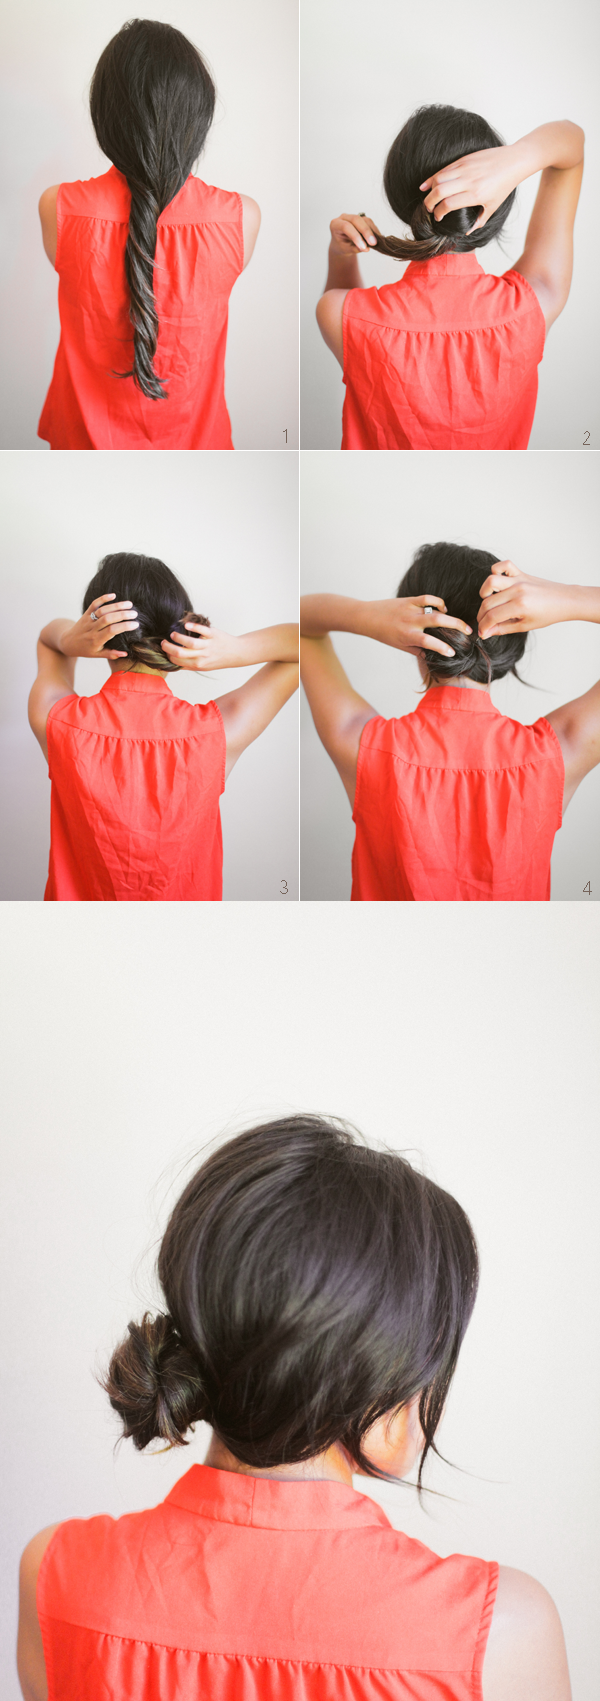 Hair Tutorials For Special Occassions